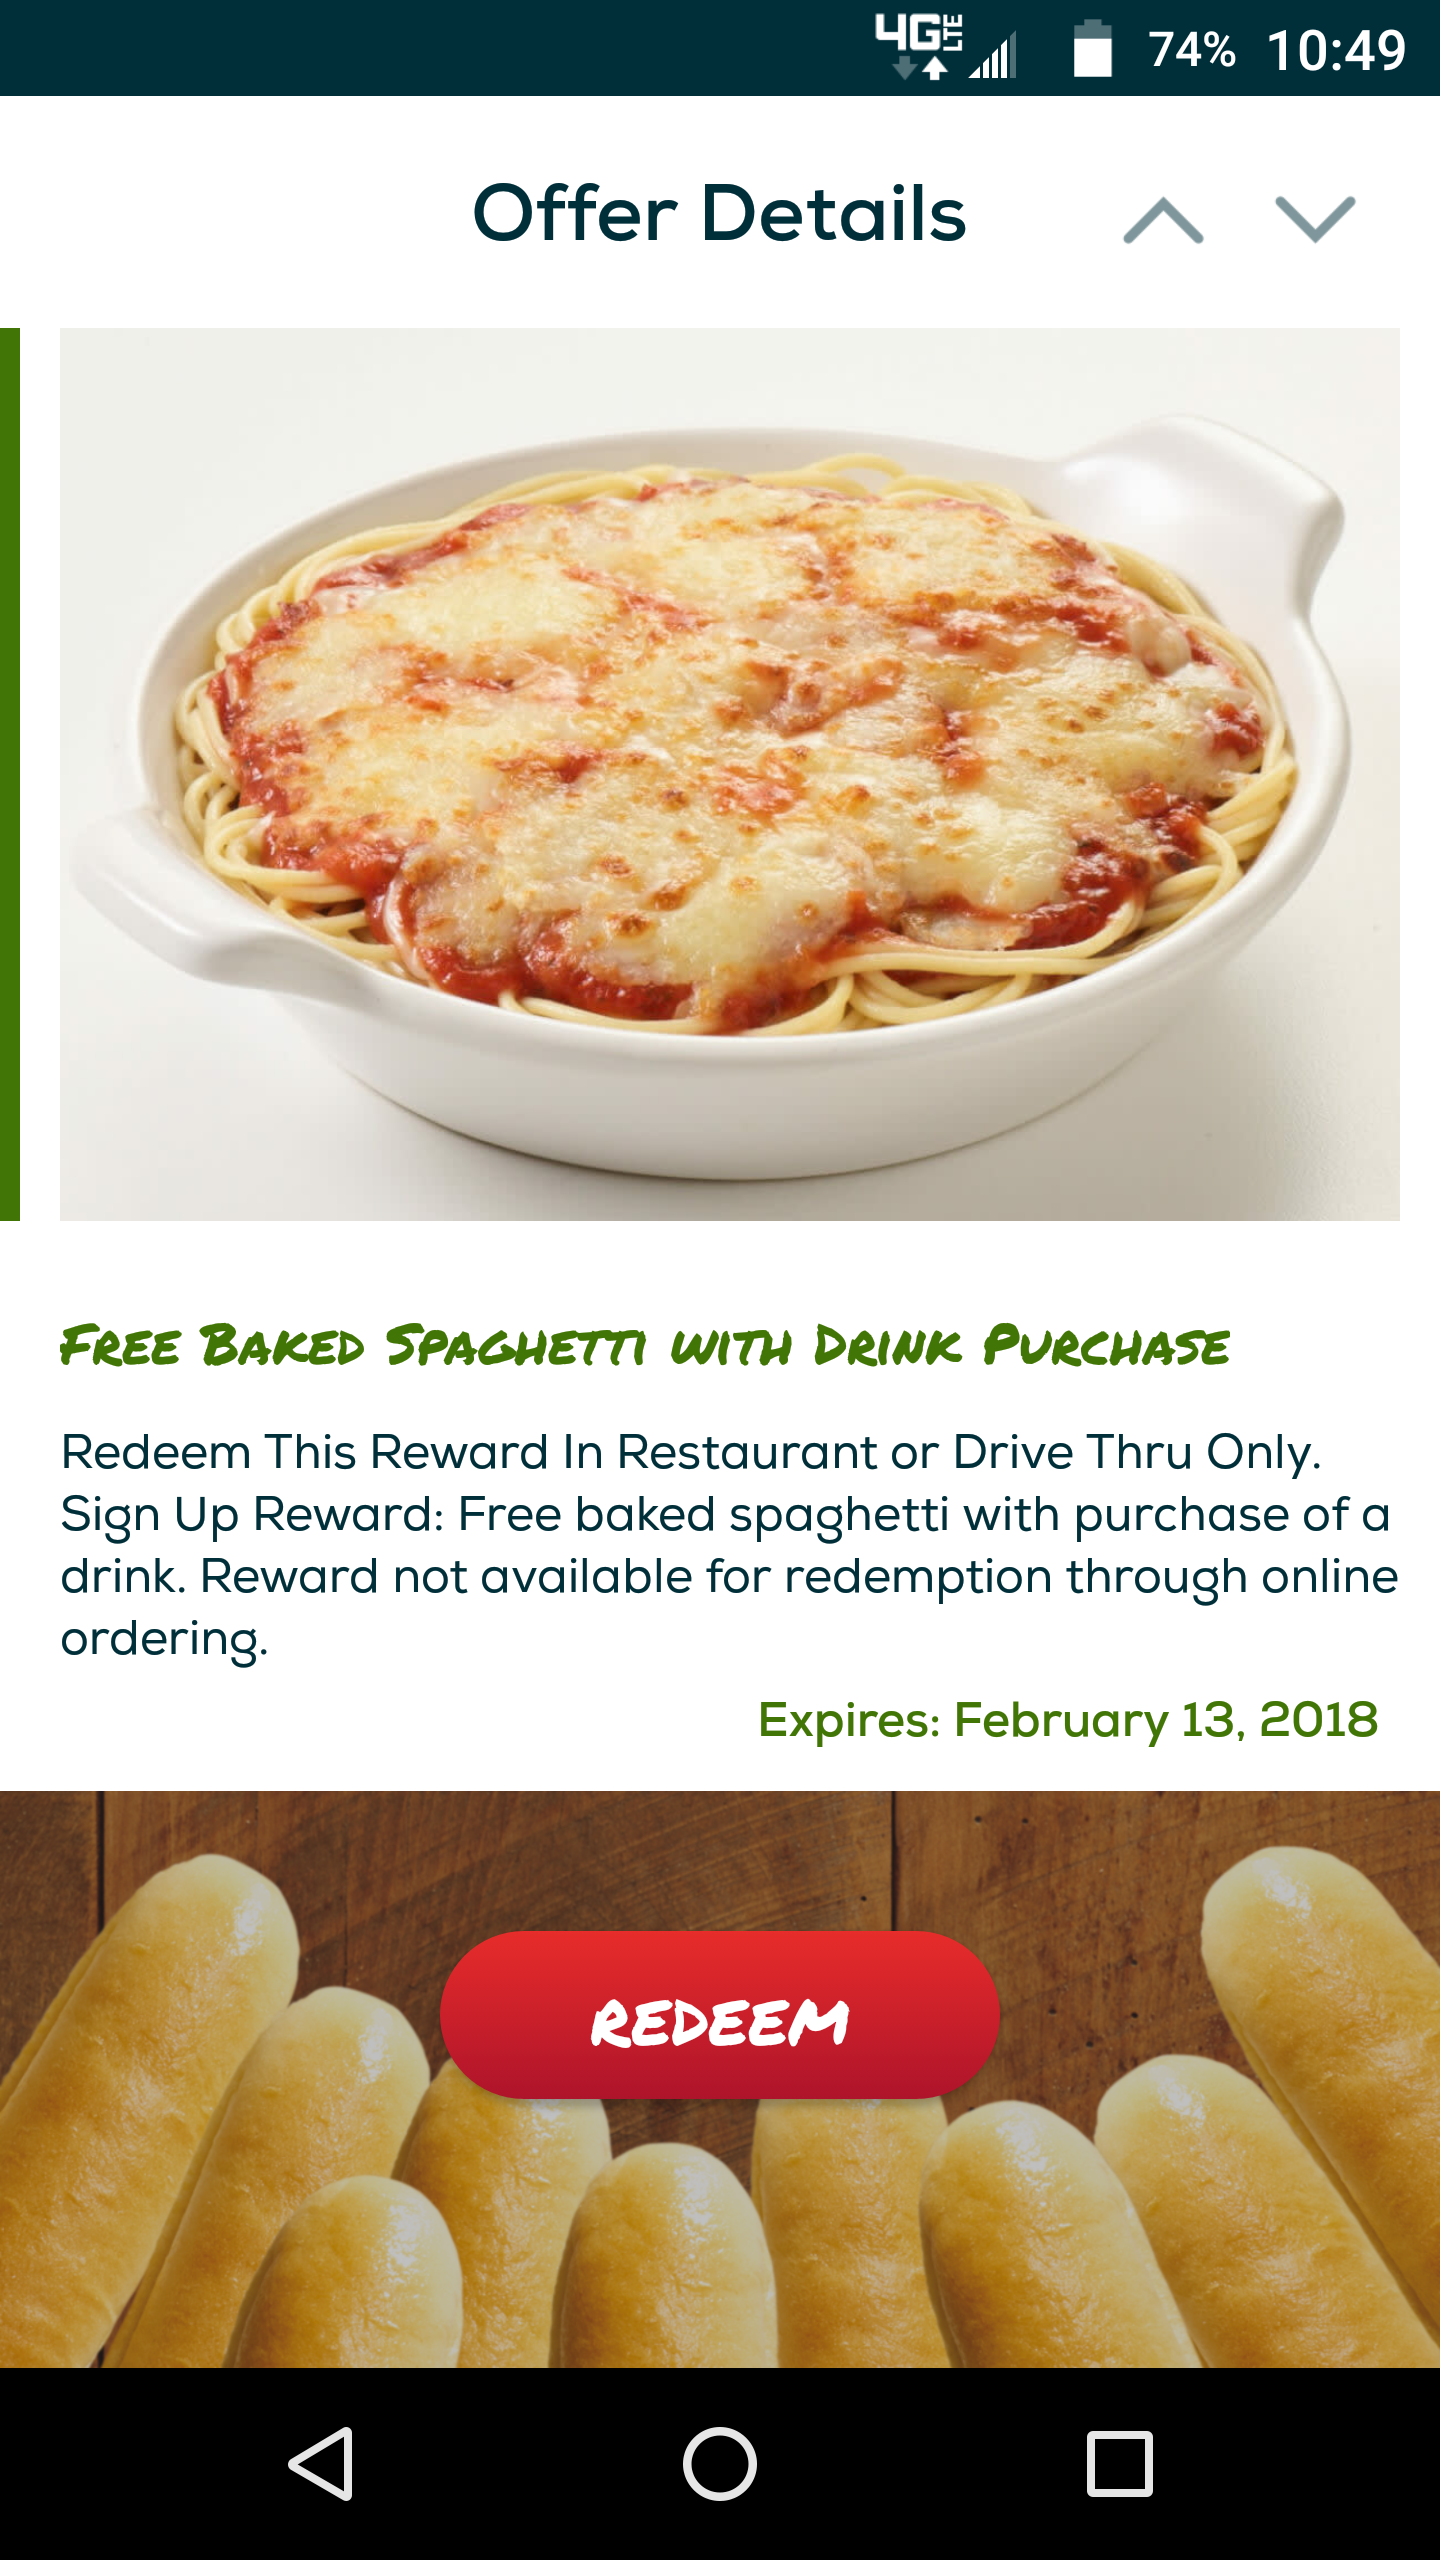 FREE Baked Spaghetti with Drink Purchase